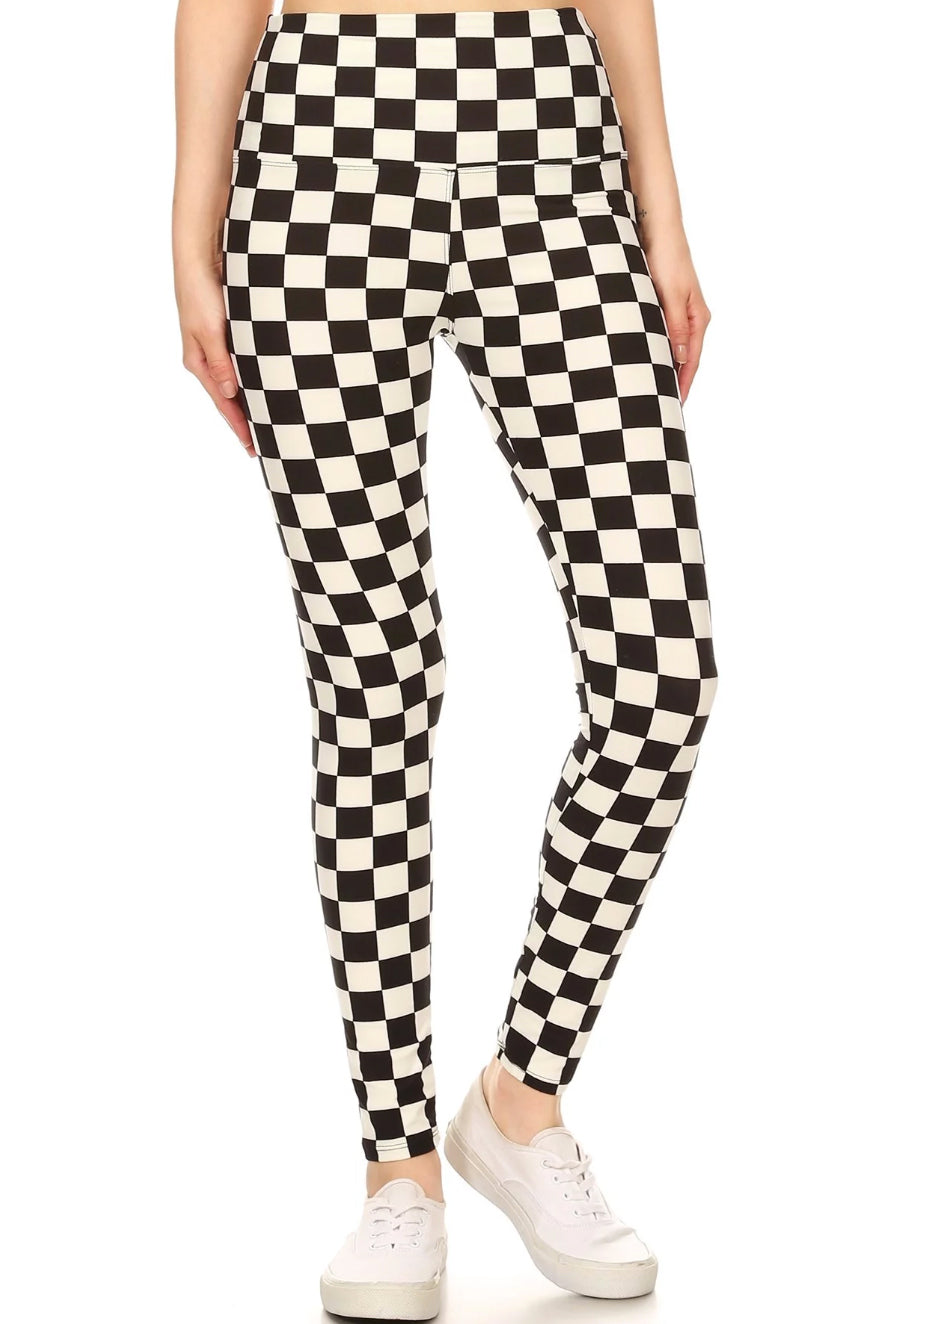 Neon Checkered Pattern Leggings w/ Banded Waist – Neon Nation